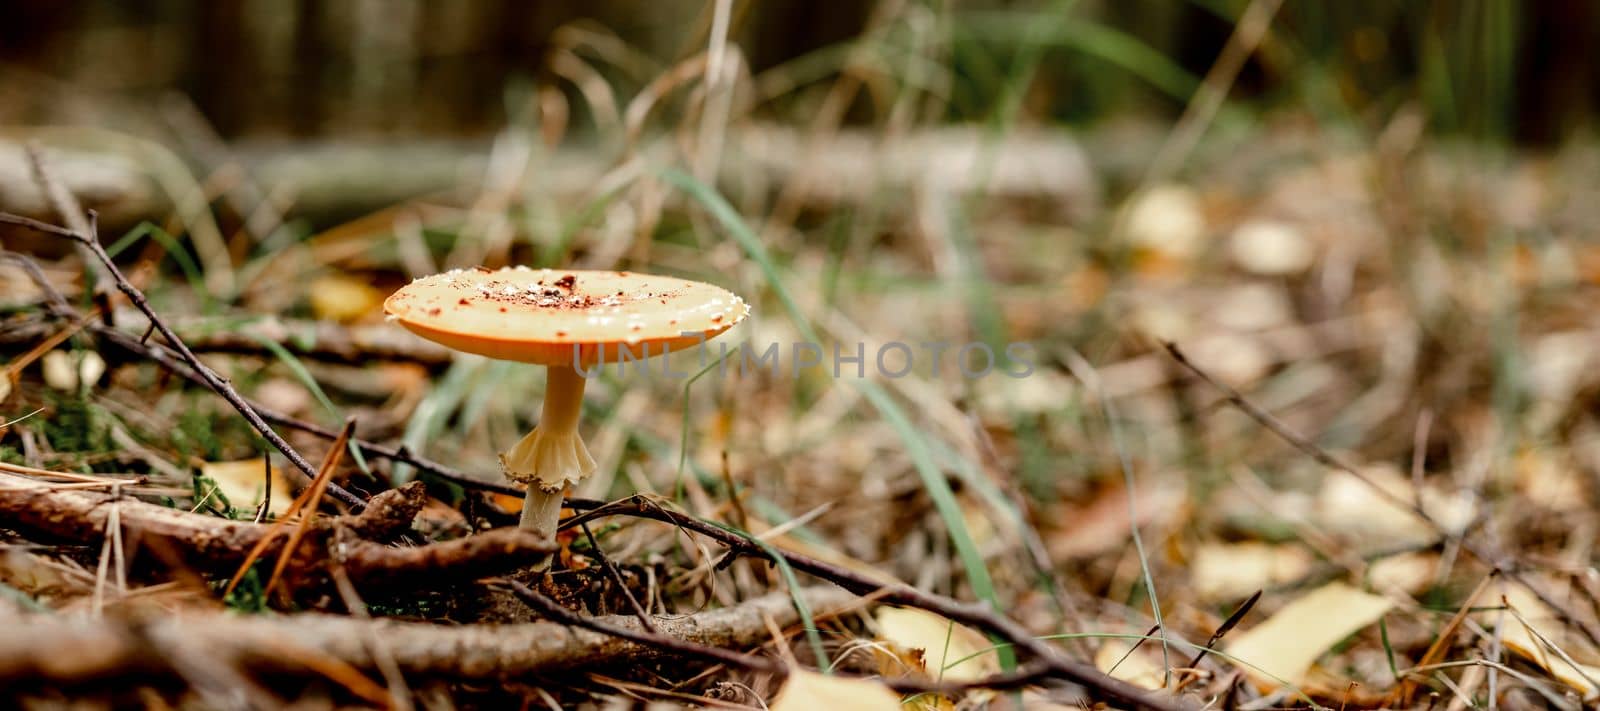 Forest mushrooms in the grass. Inedible mushrooms in the forest